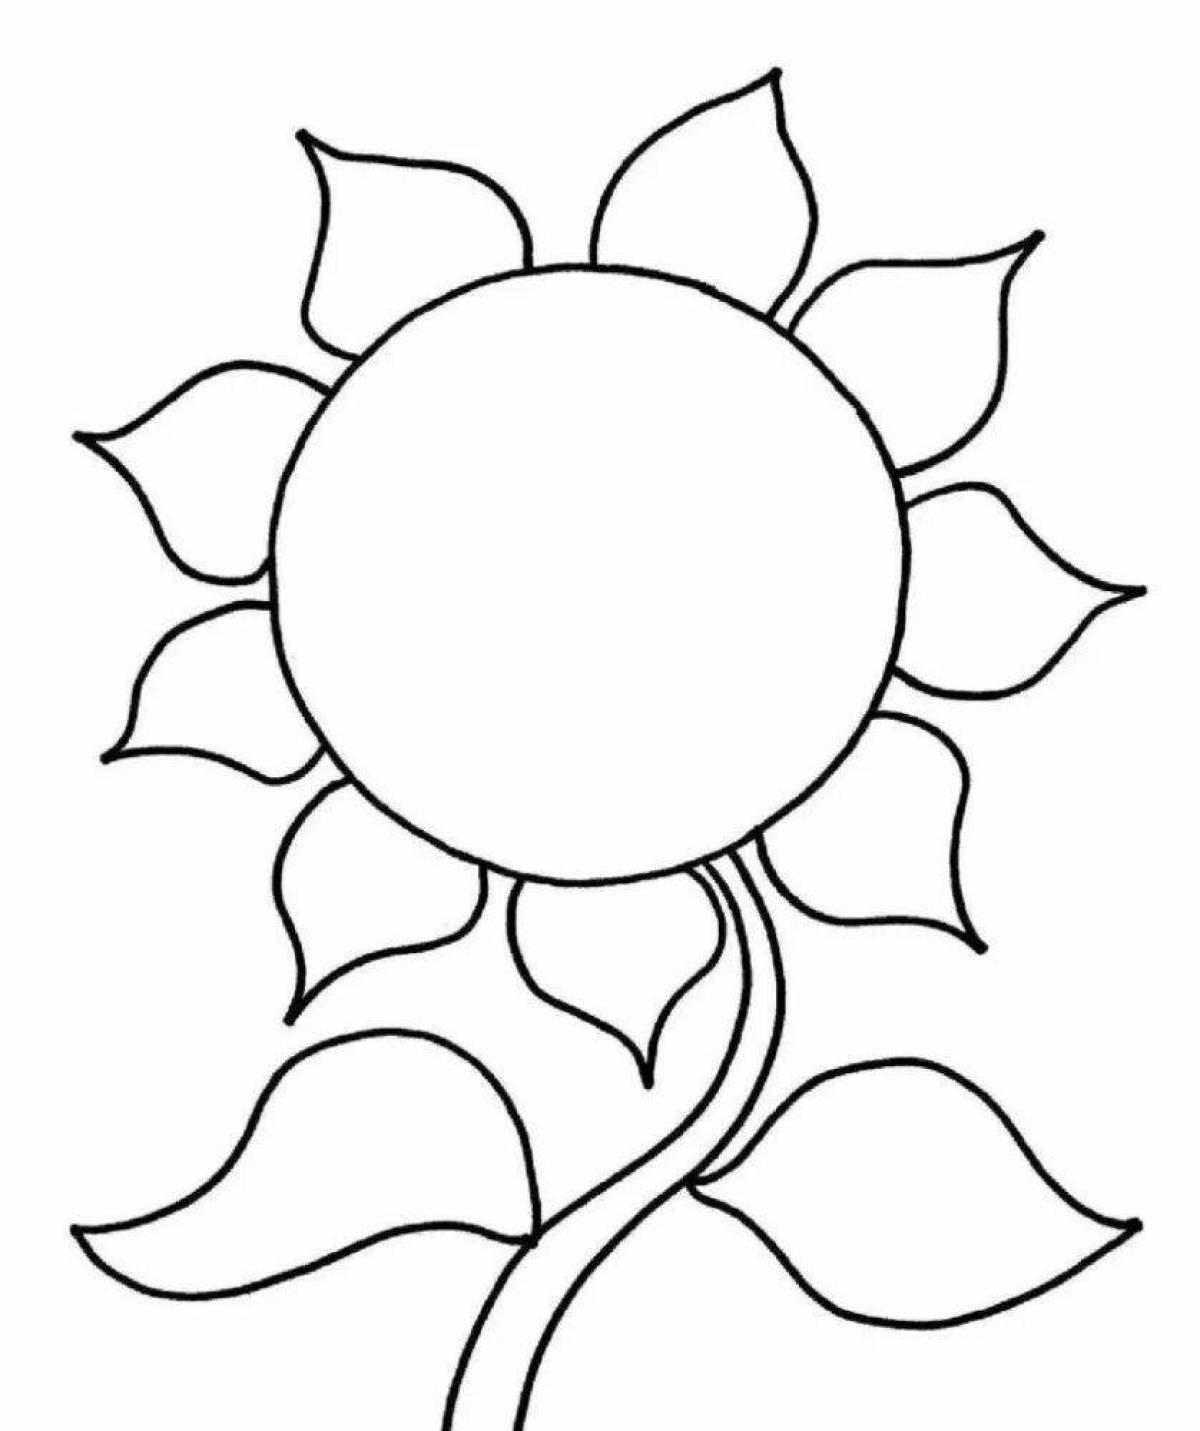 Awesome sunflower coloring pages for 2-3 year olds